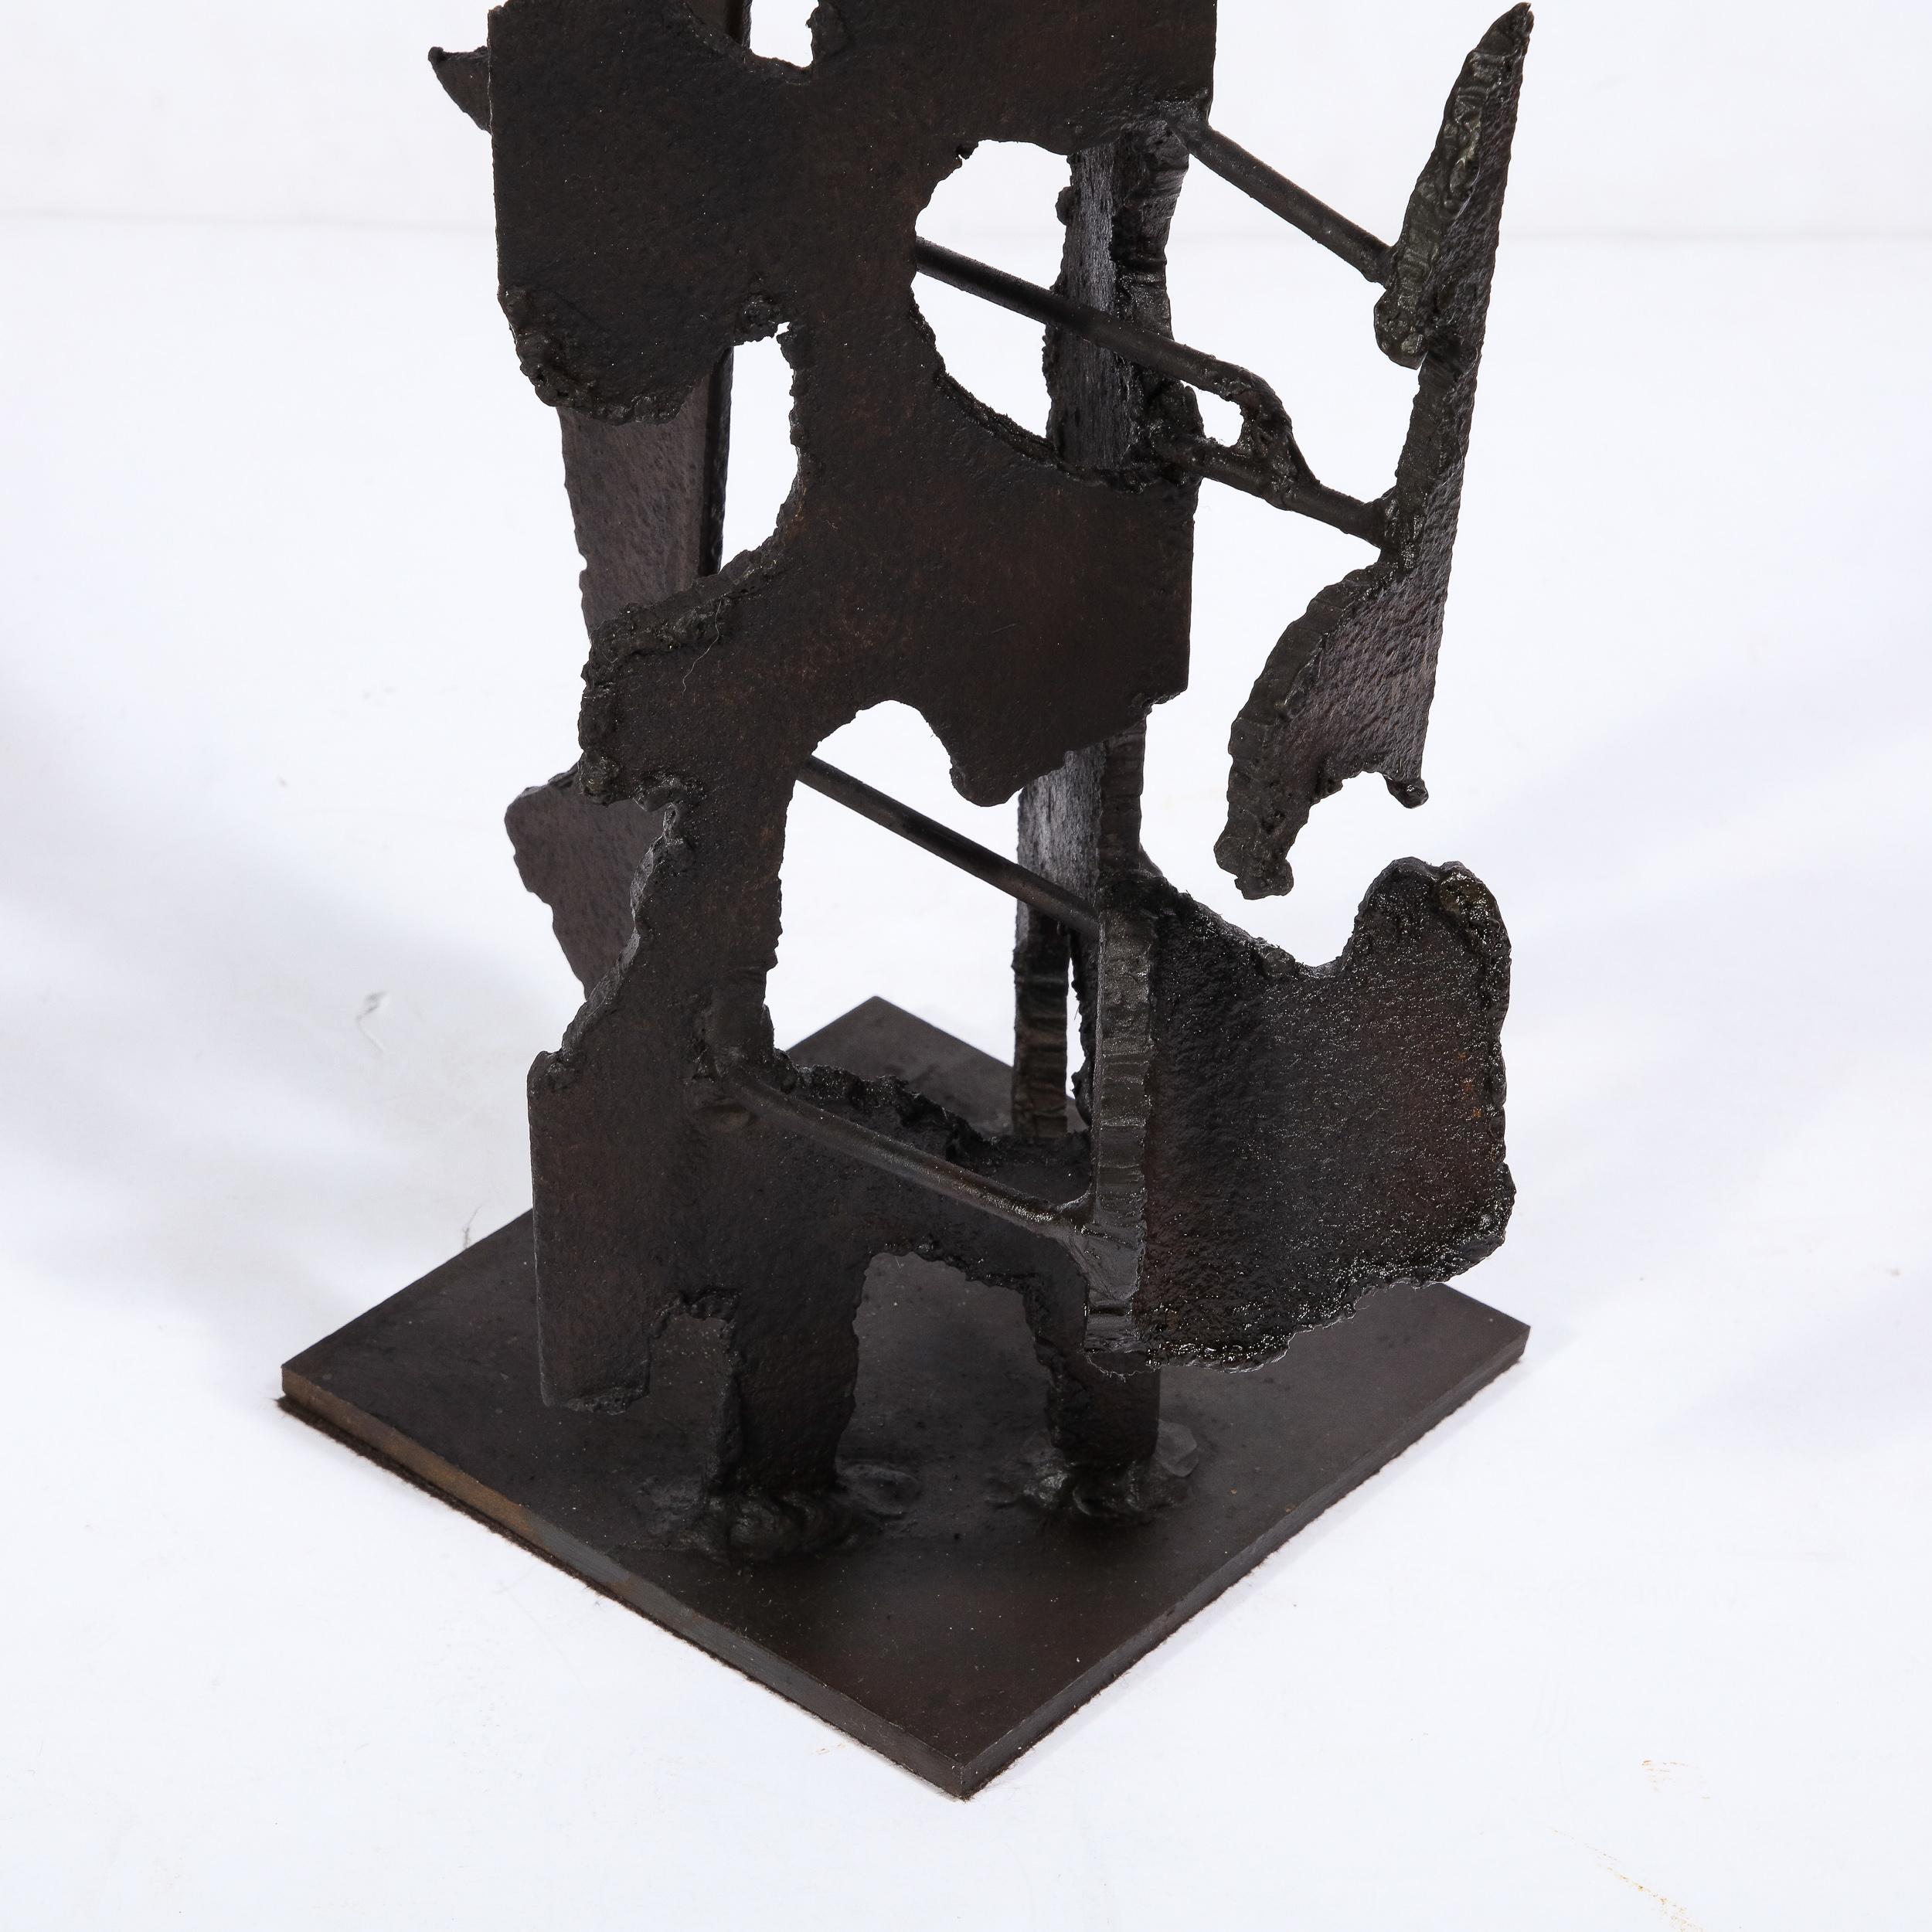 Brutalist Steel Sculpture in Oil and Waxed Finish by Jan Van Deckter For Sale 8